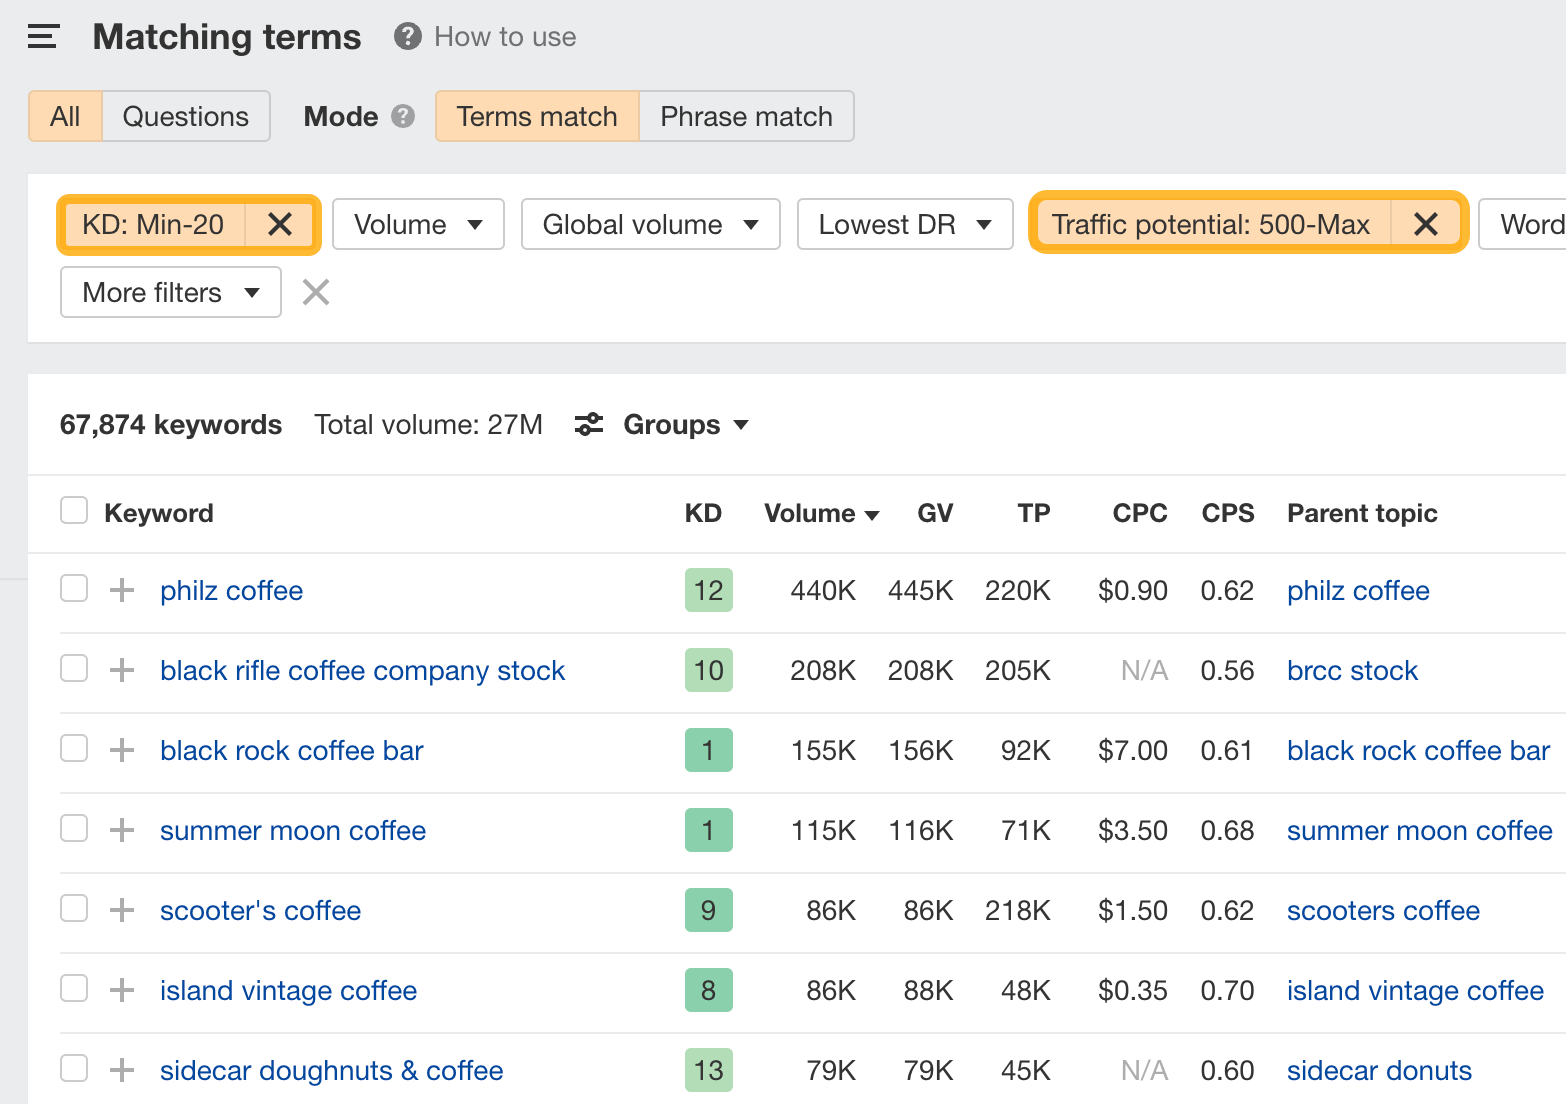 KD and TP filtered in the Matching terms report, via Ahrefs' Keywords Explorer